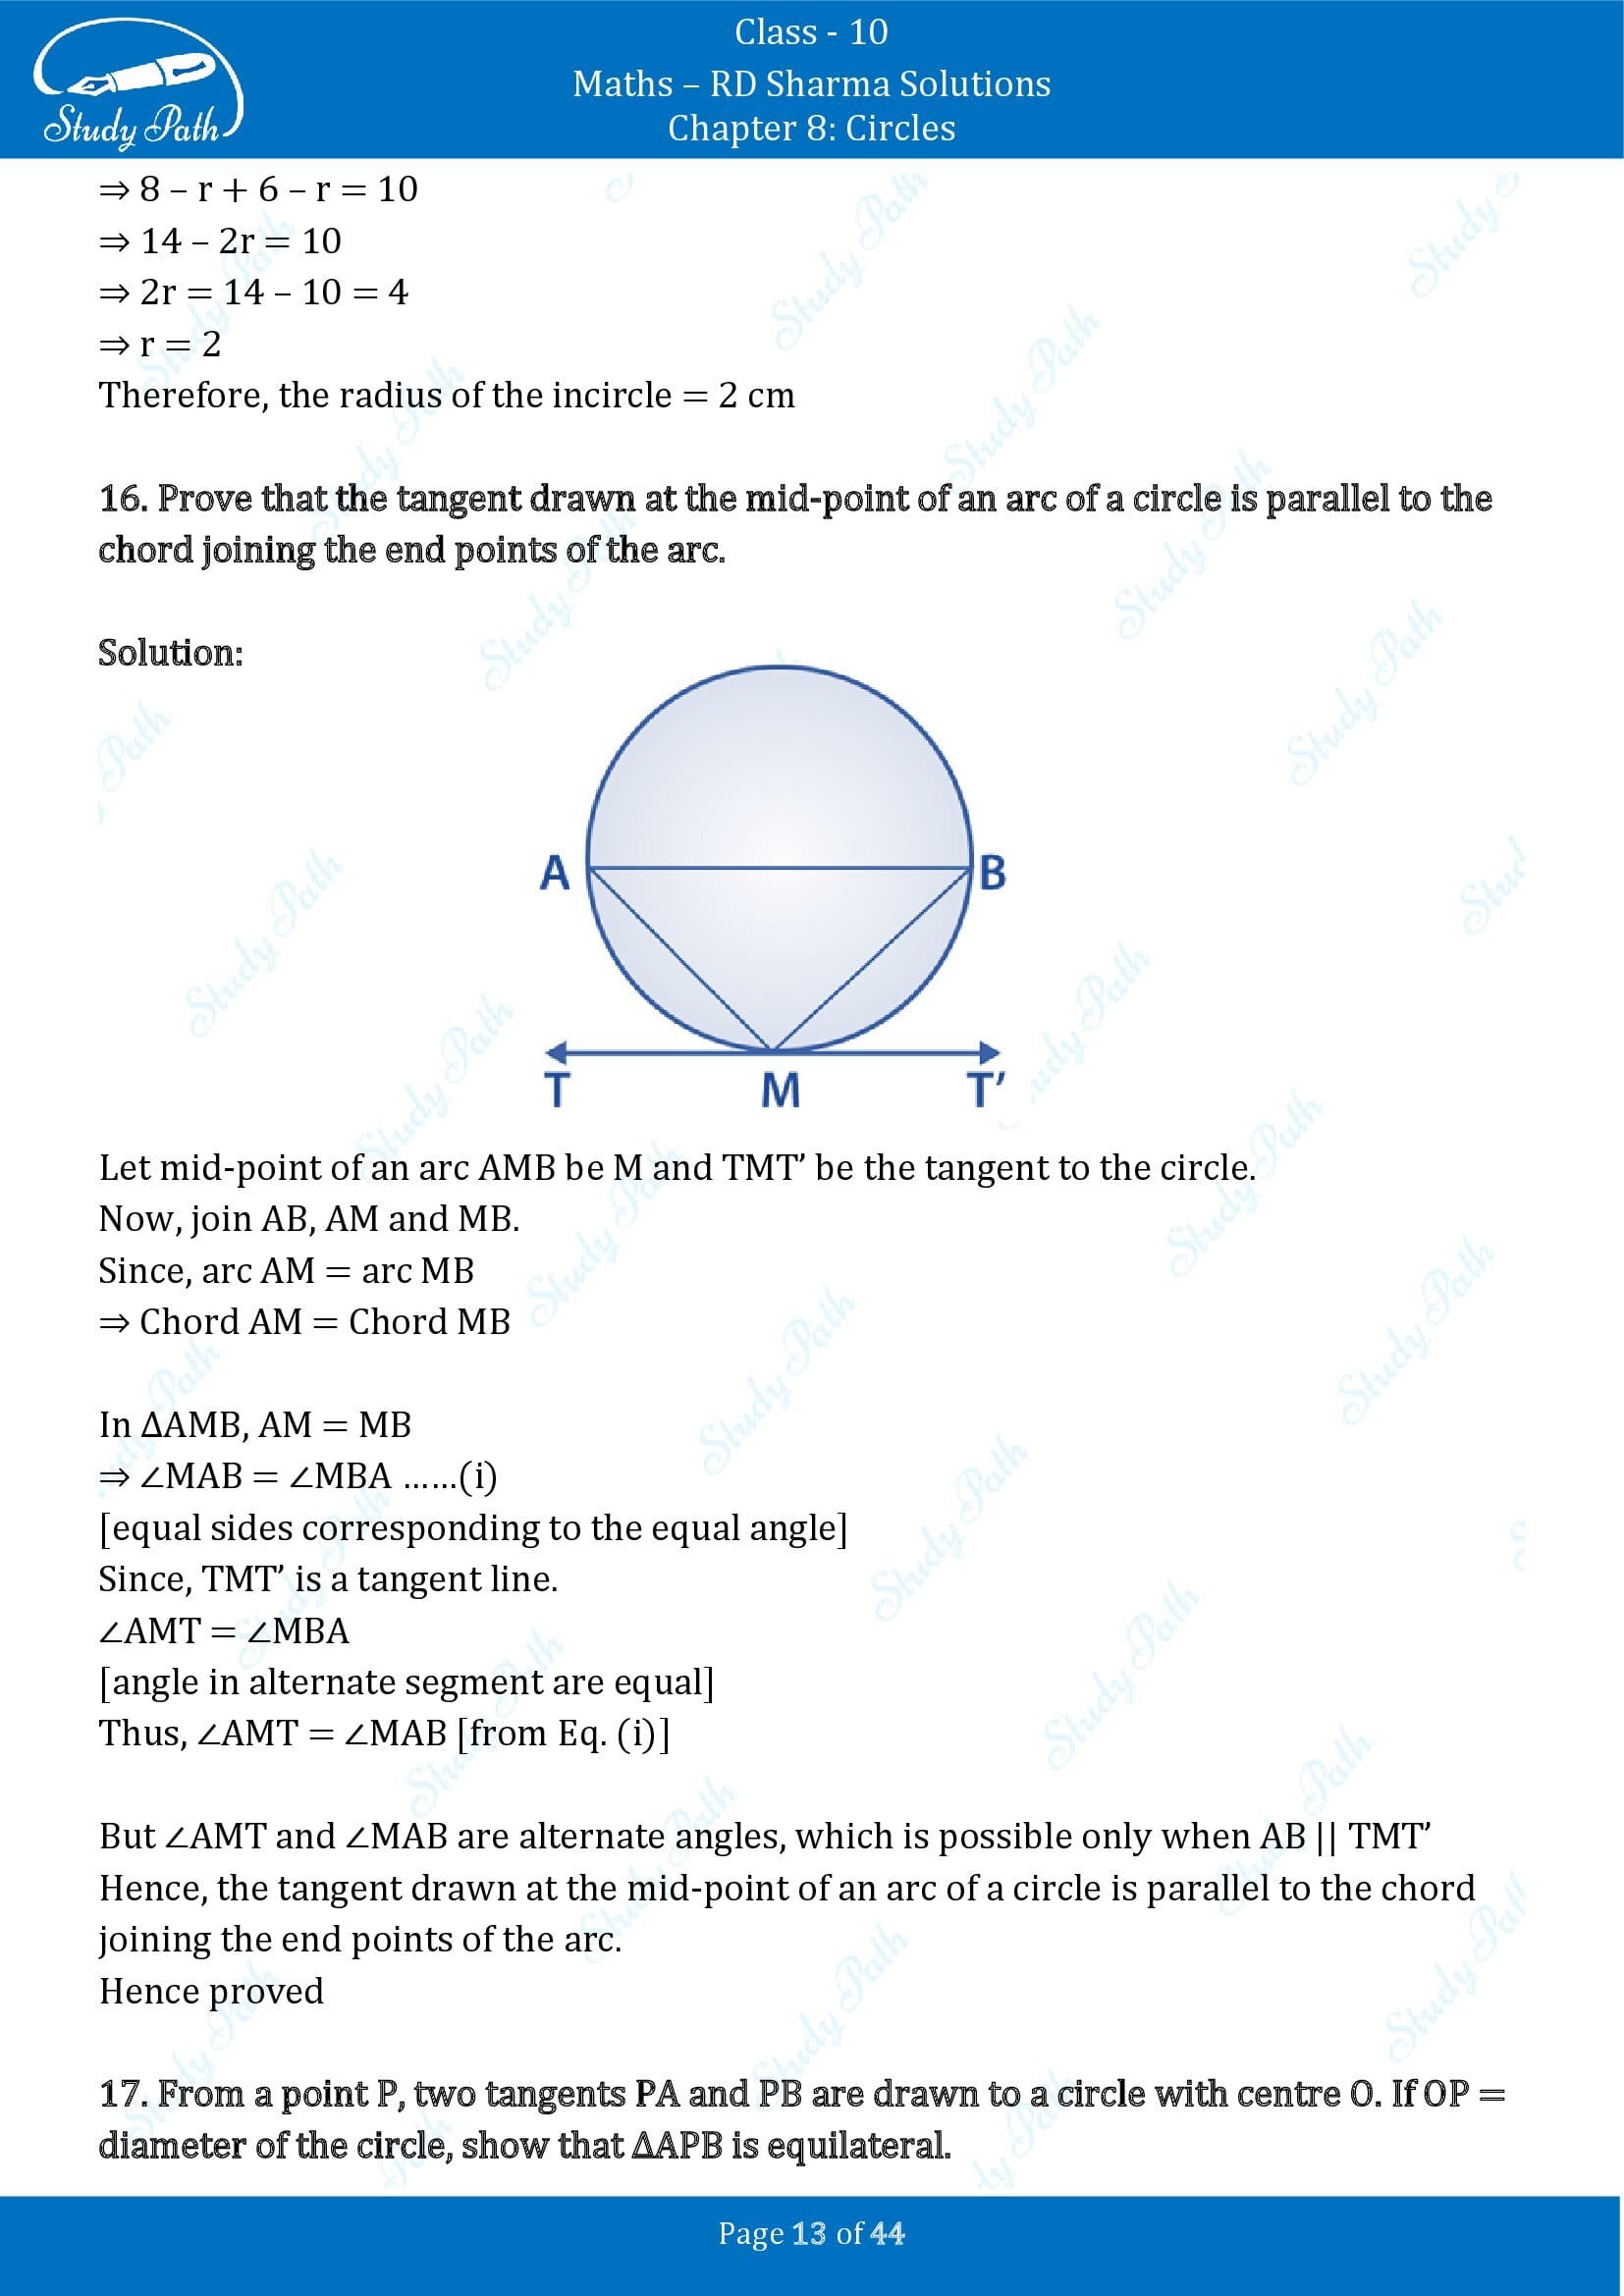 RD Sharma Solutions Class 10 Chapter 8 Circles Exercise 8.2 00013